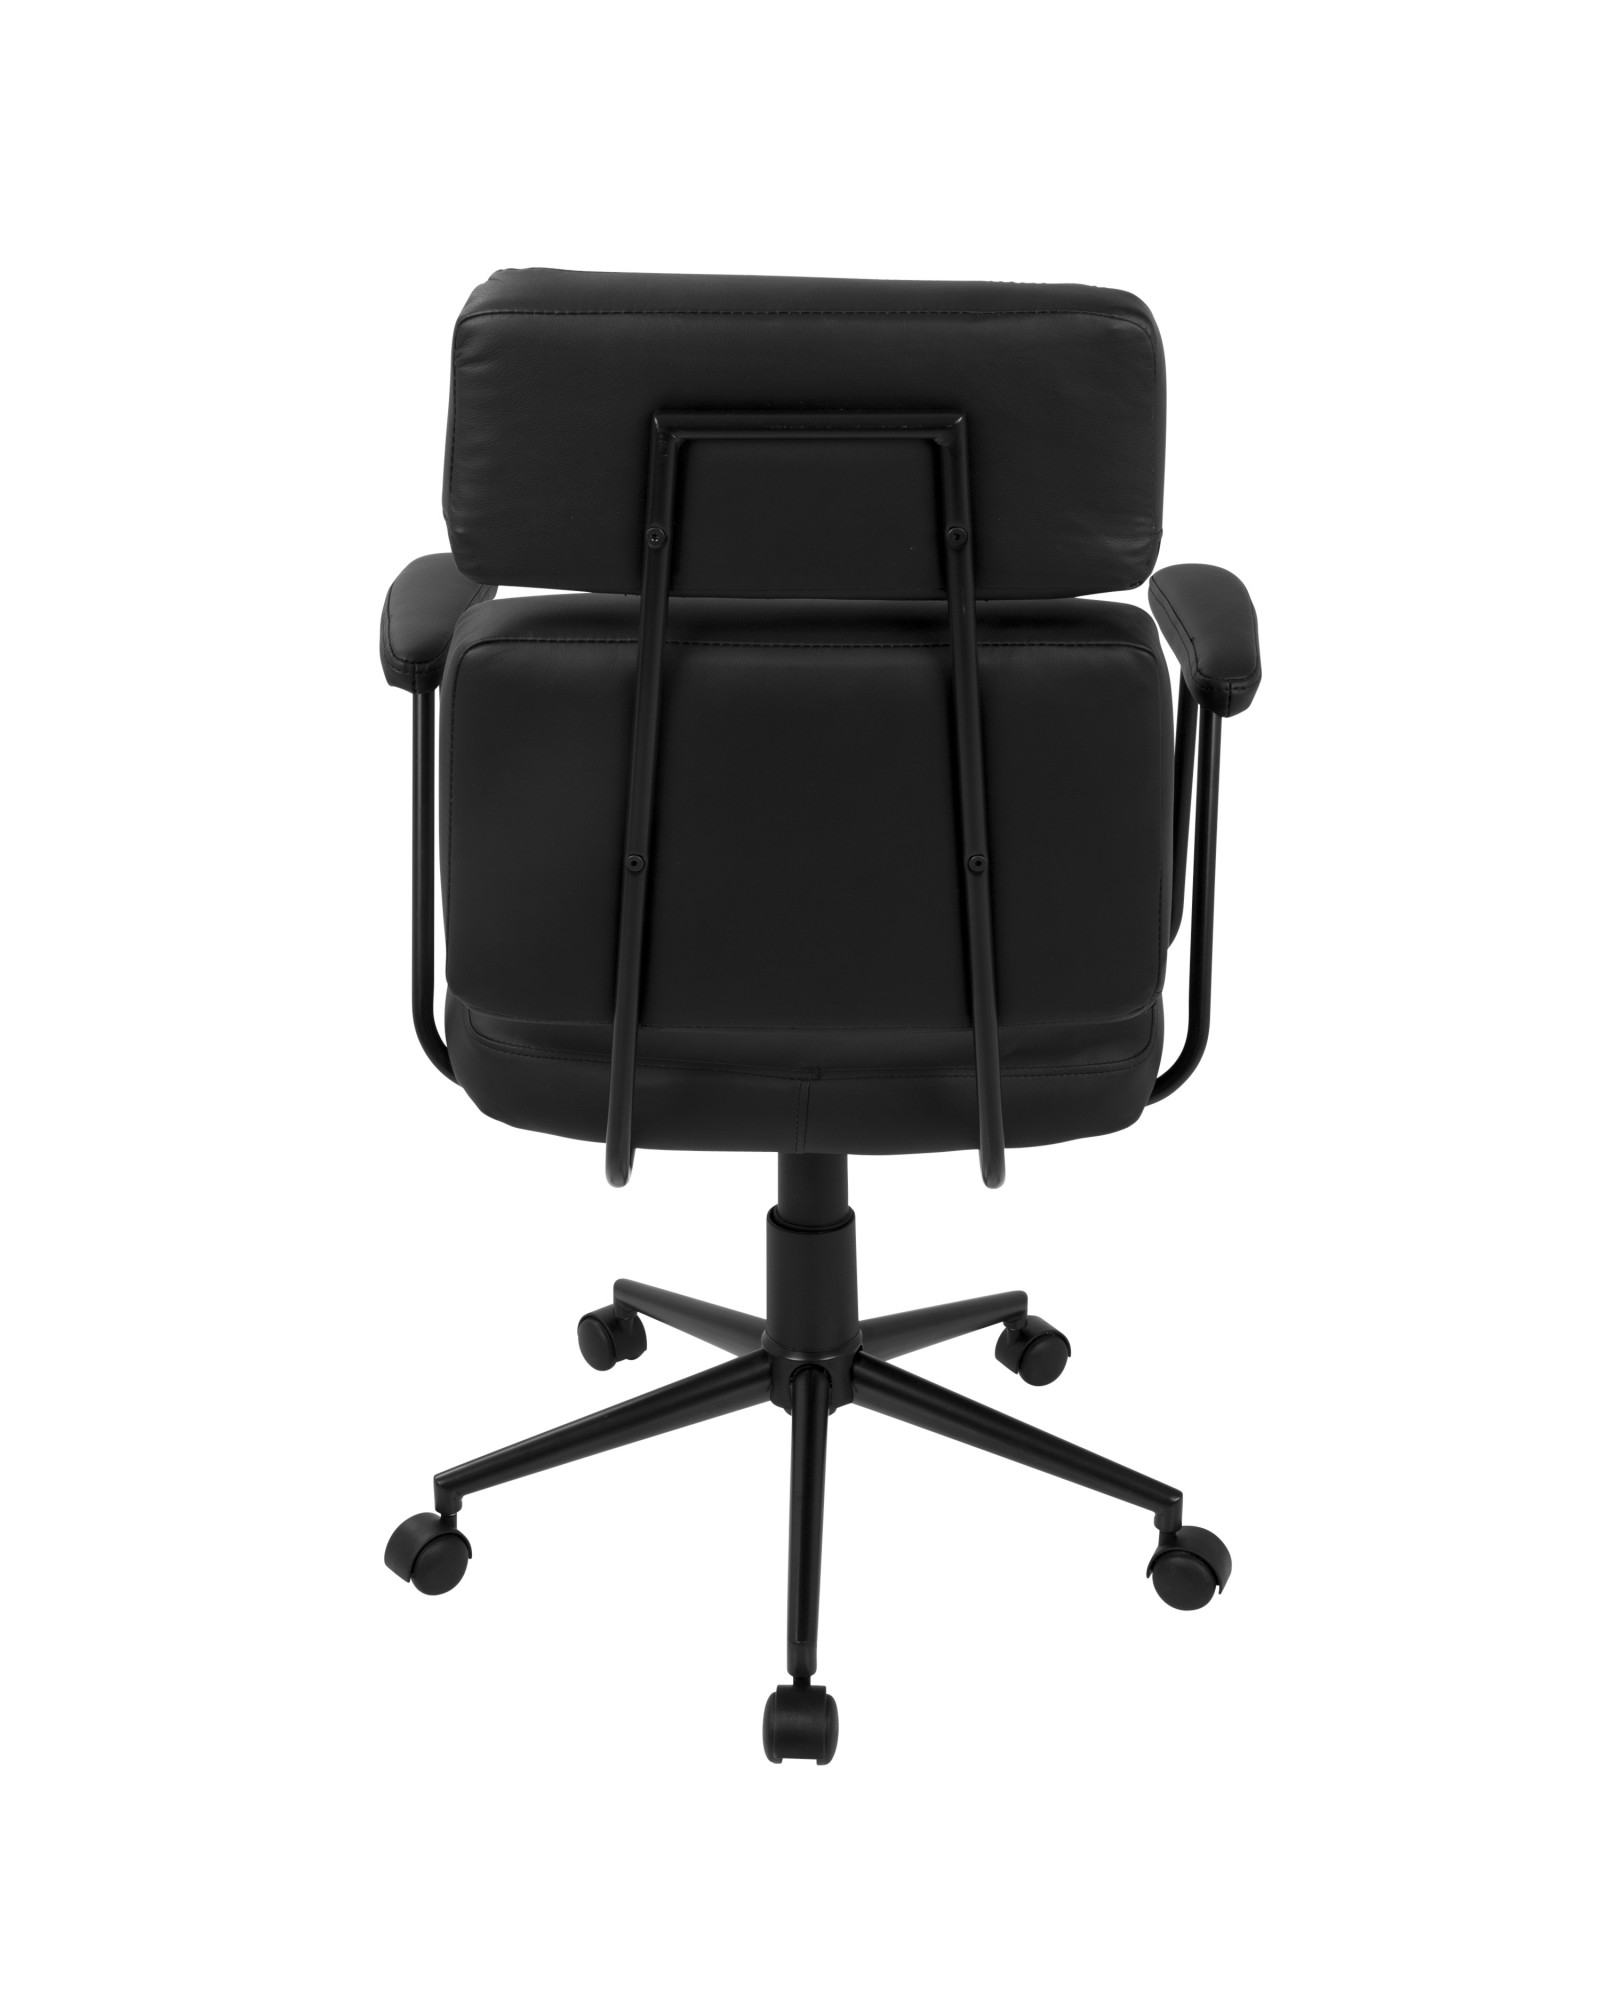 Sigmund Contemporary Adjustable Office Chair in Black Faux Leather